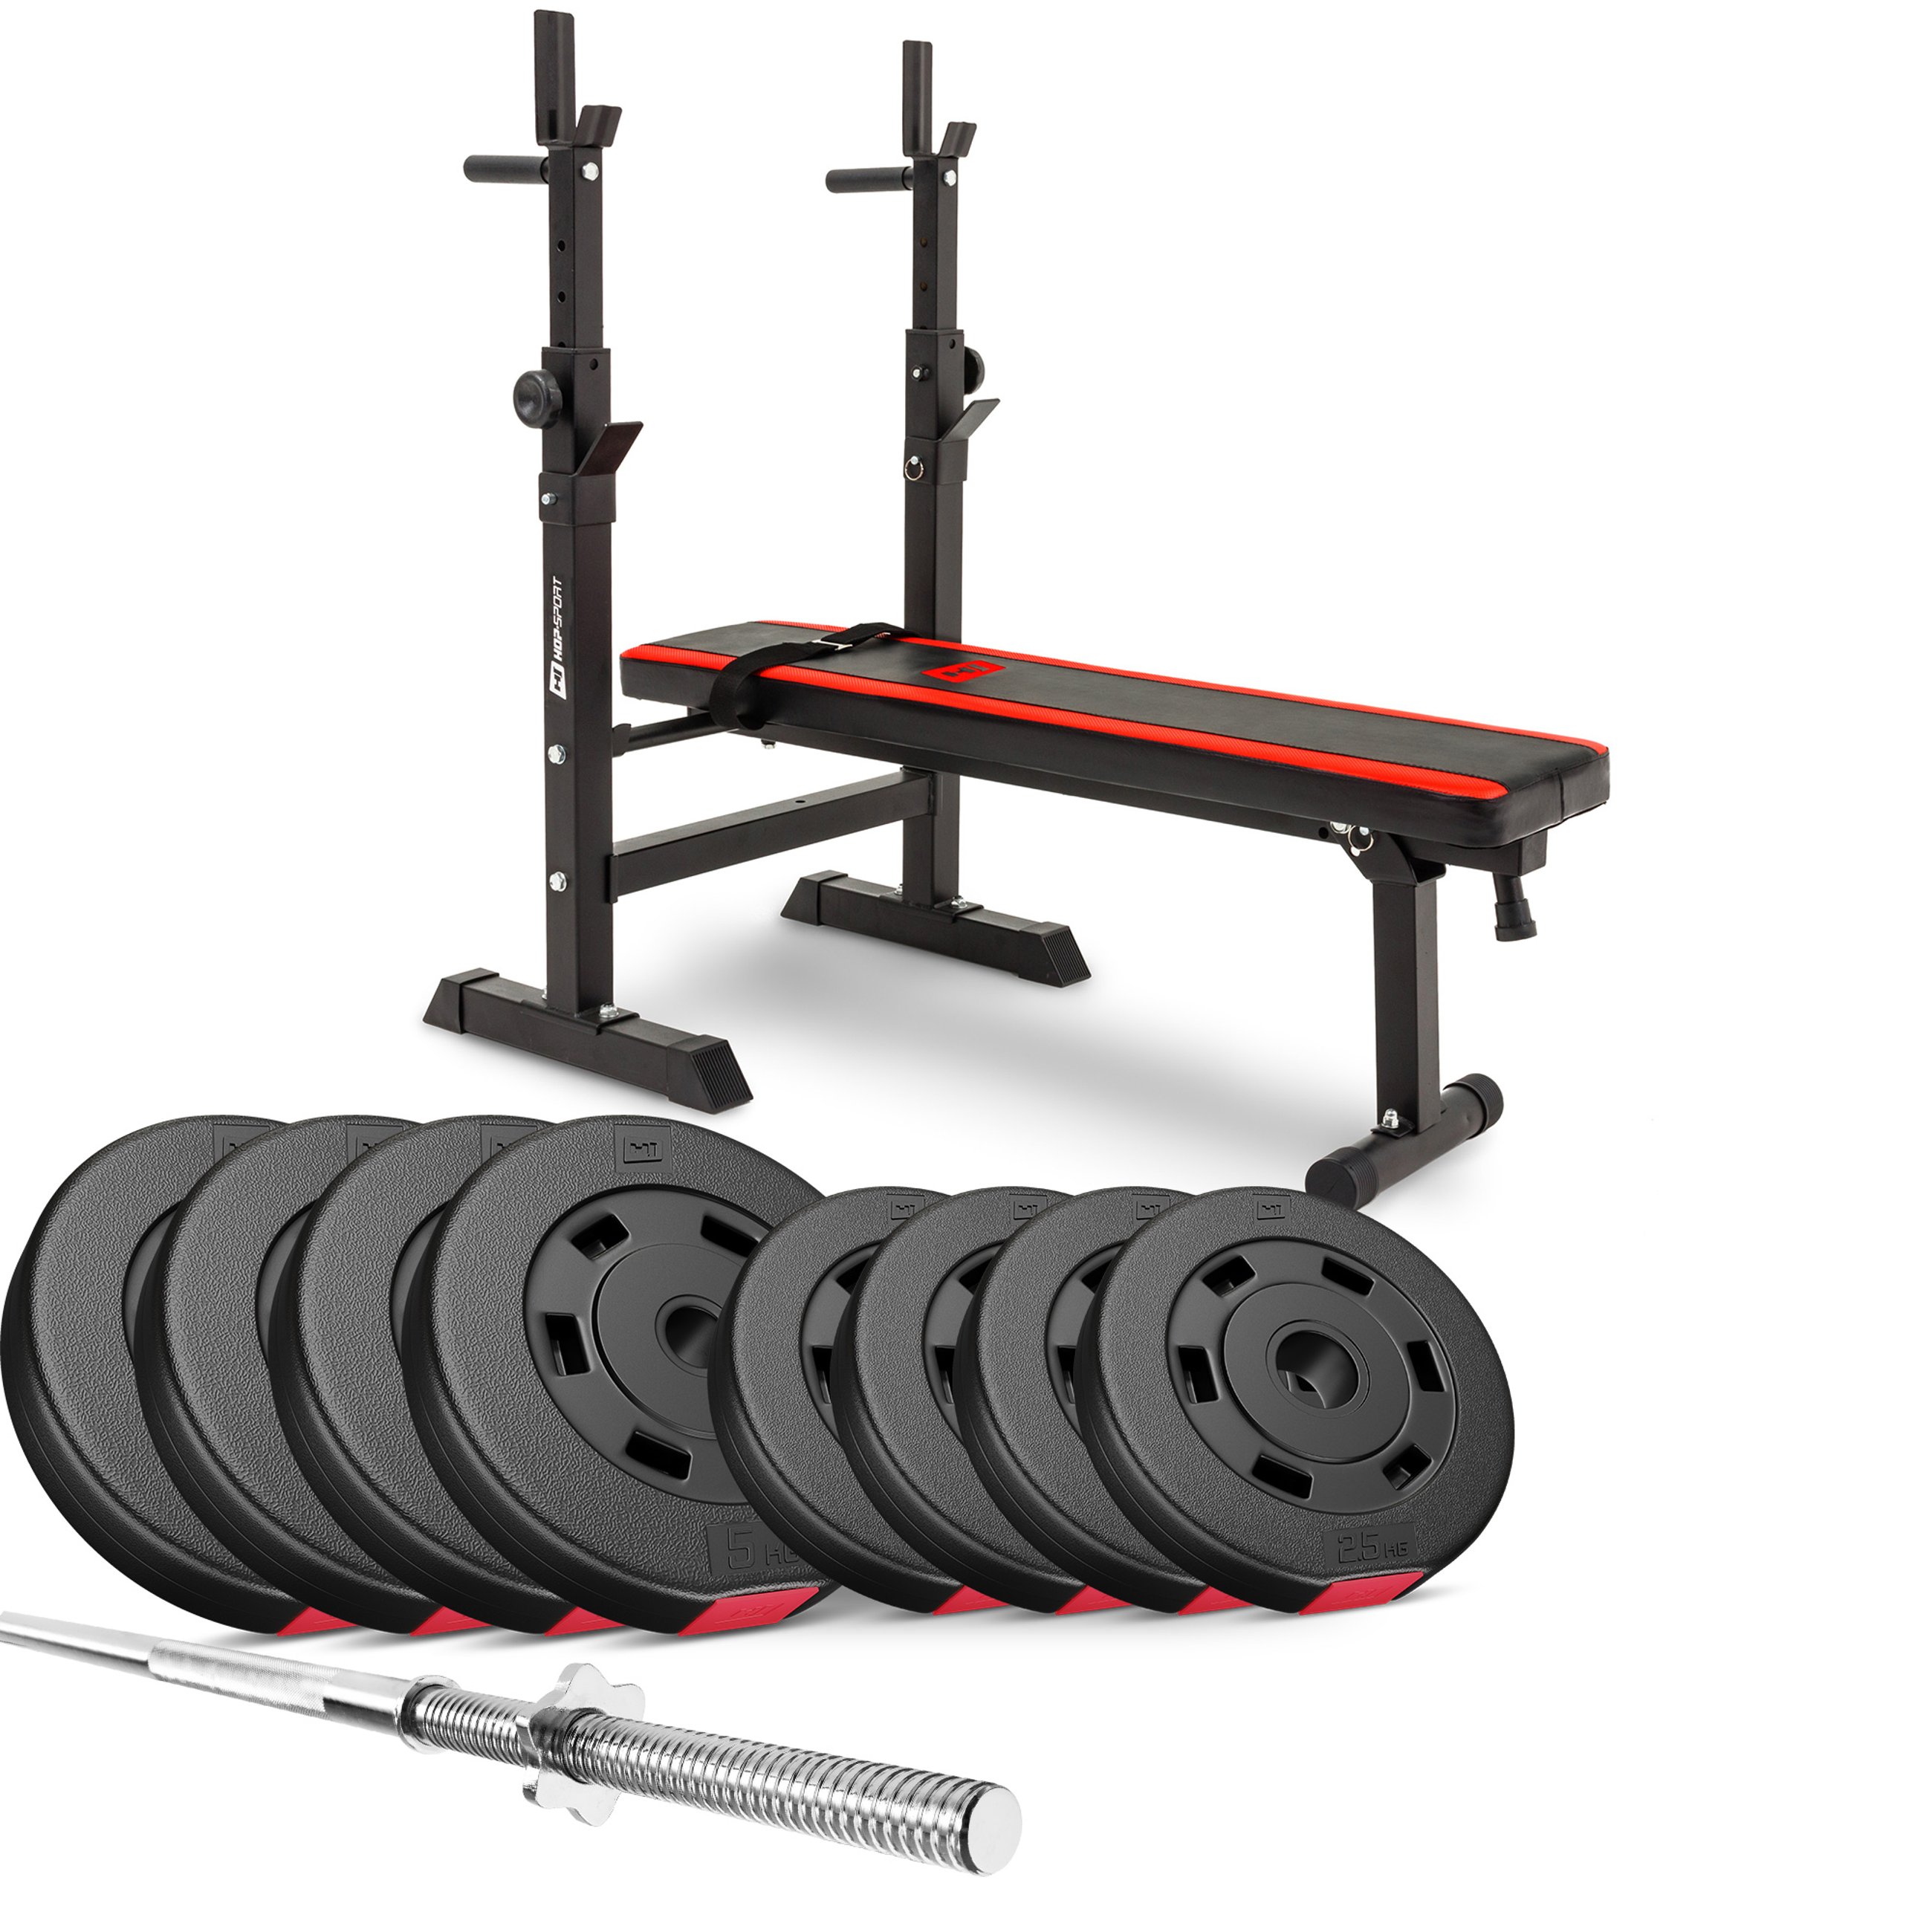 Premium 39 kg Barbell Set with HS-1080 Weight Bench